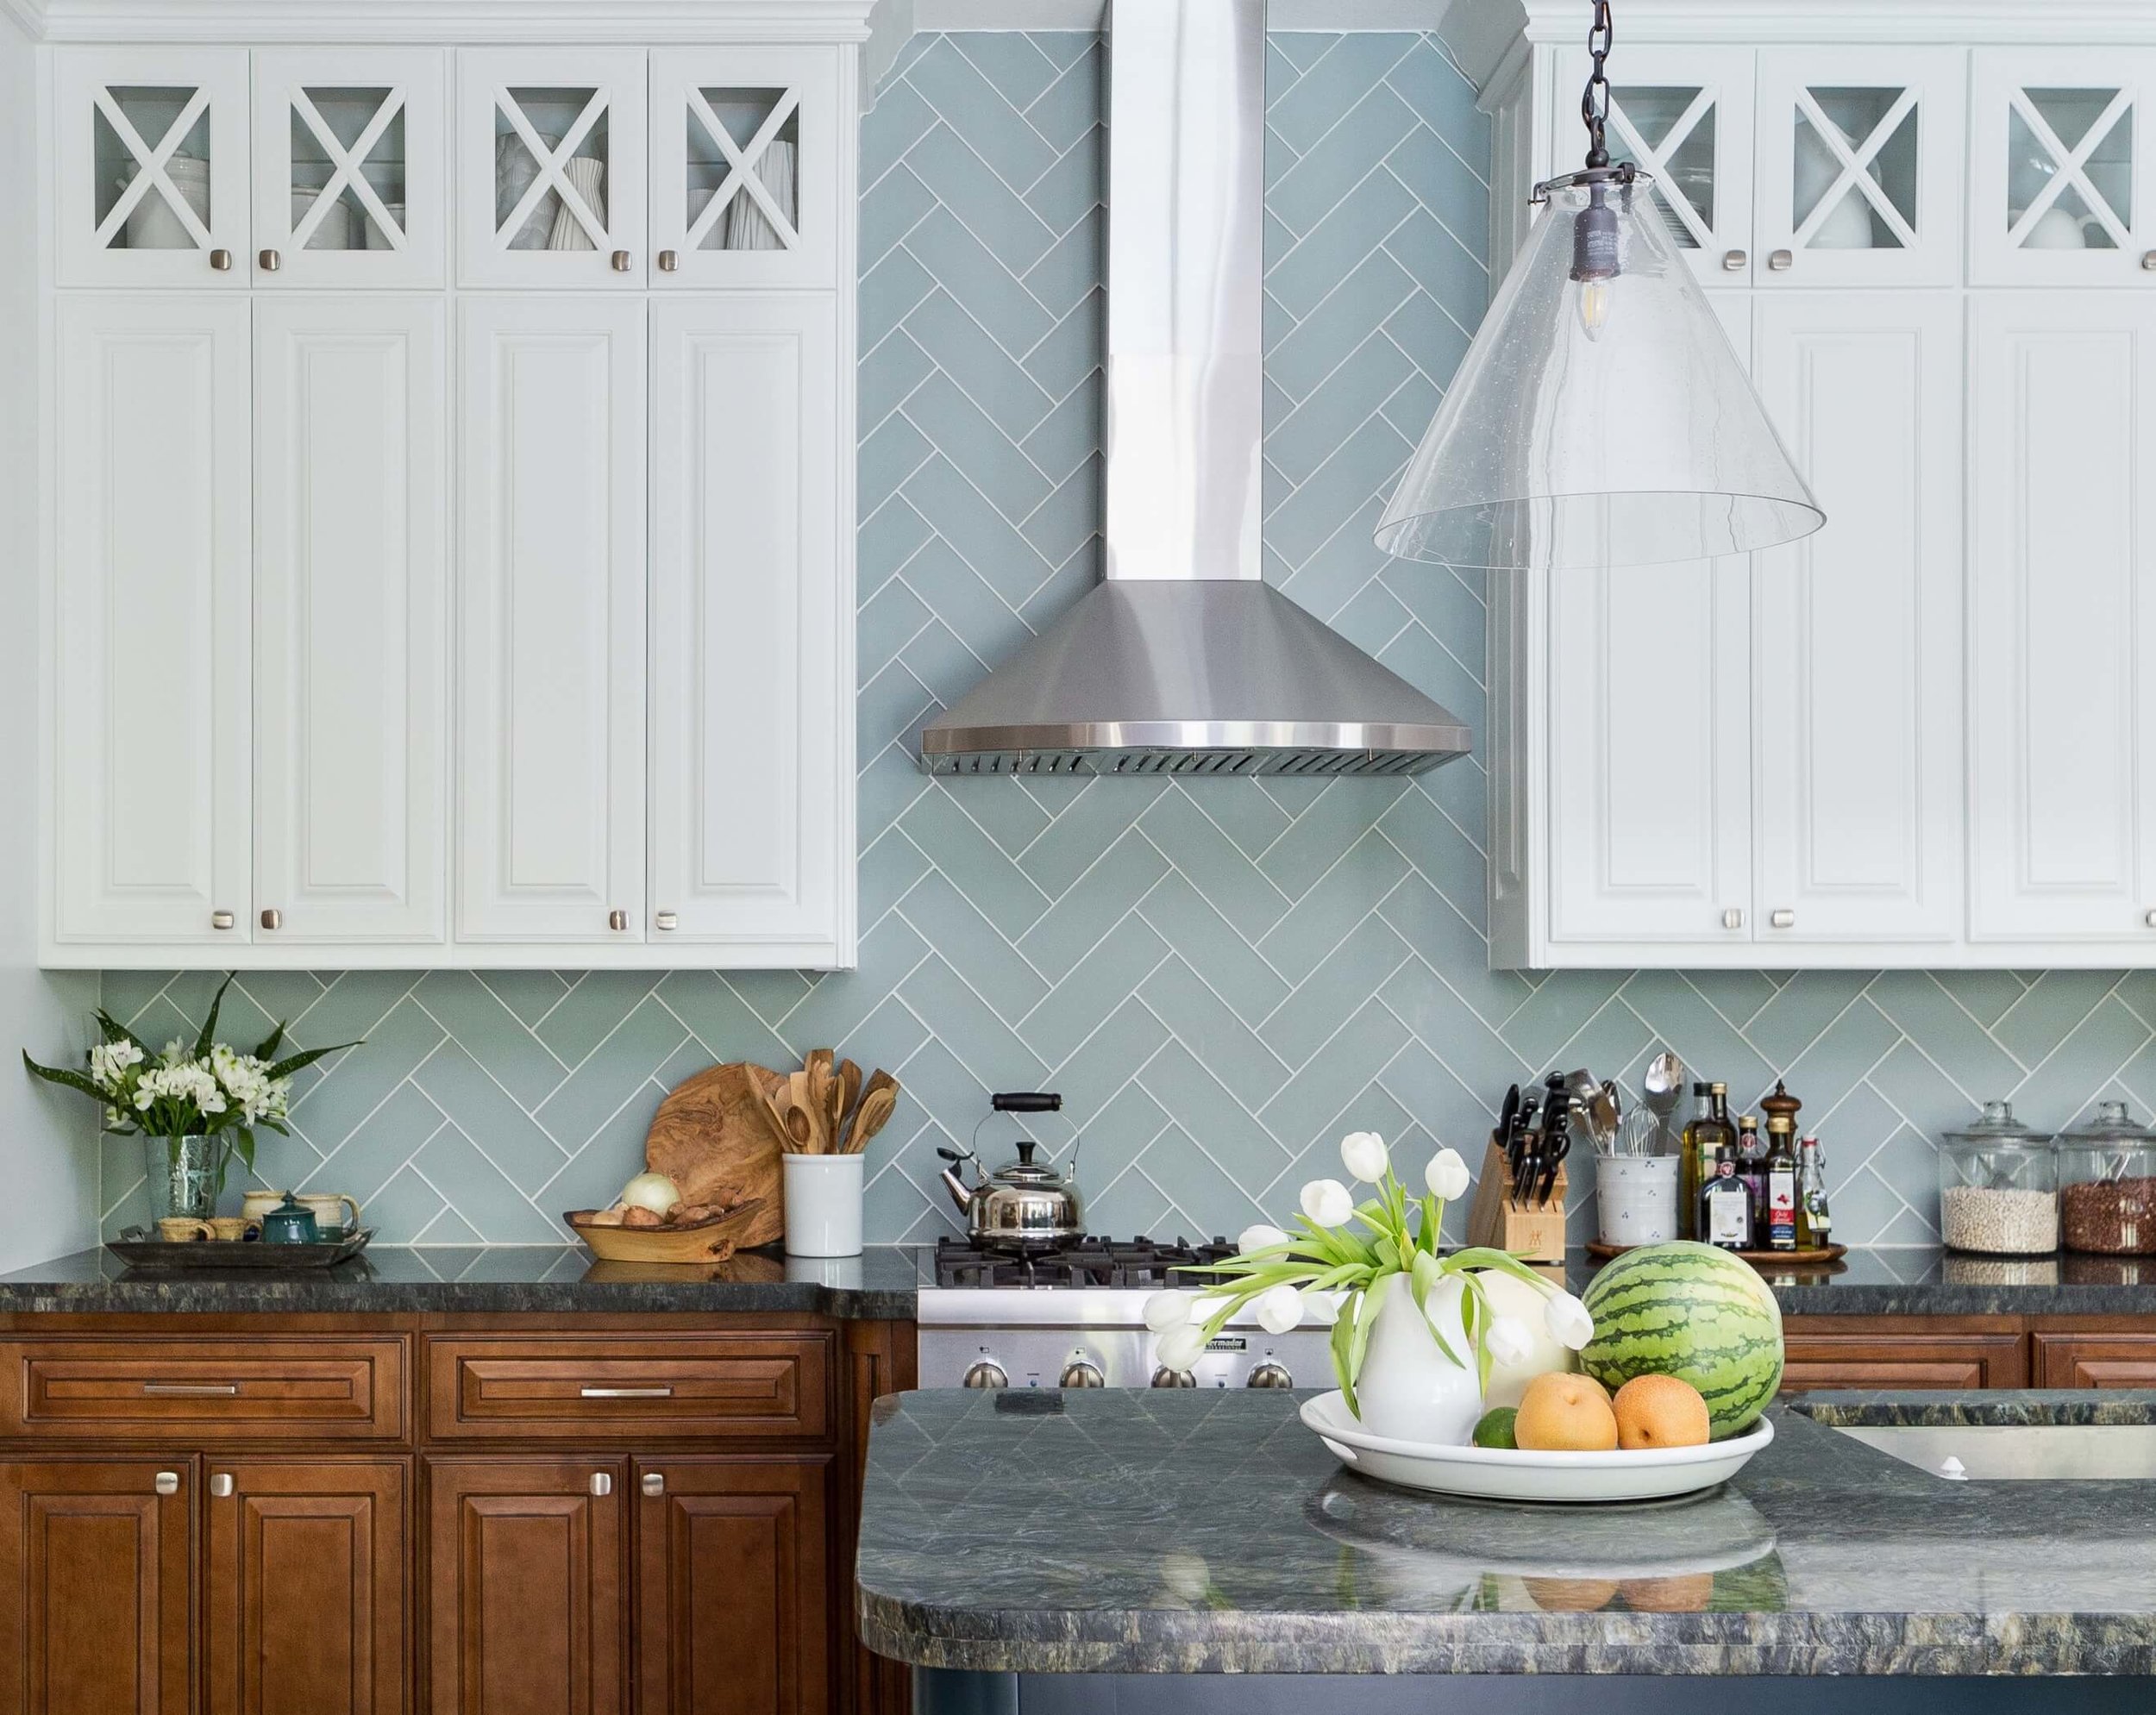 Designers Are Loving This Color For Kitchen Cabinets Right Now - Dark Teal  Cabinets